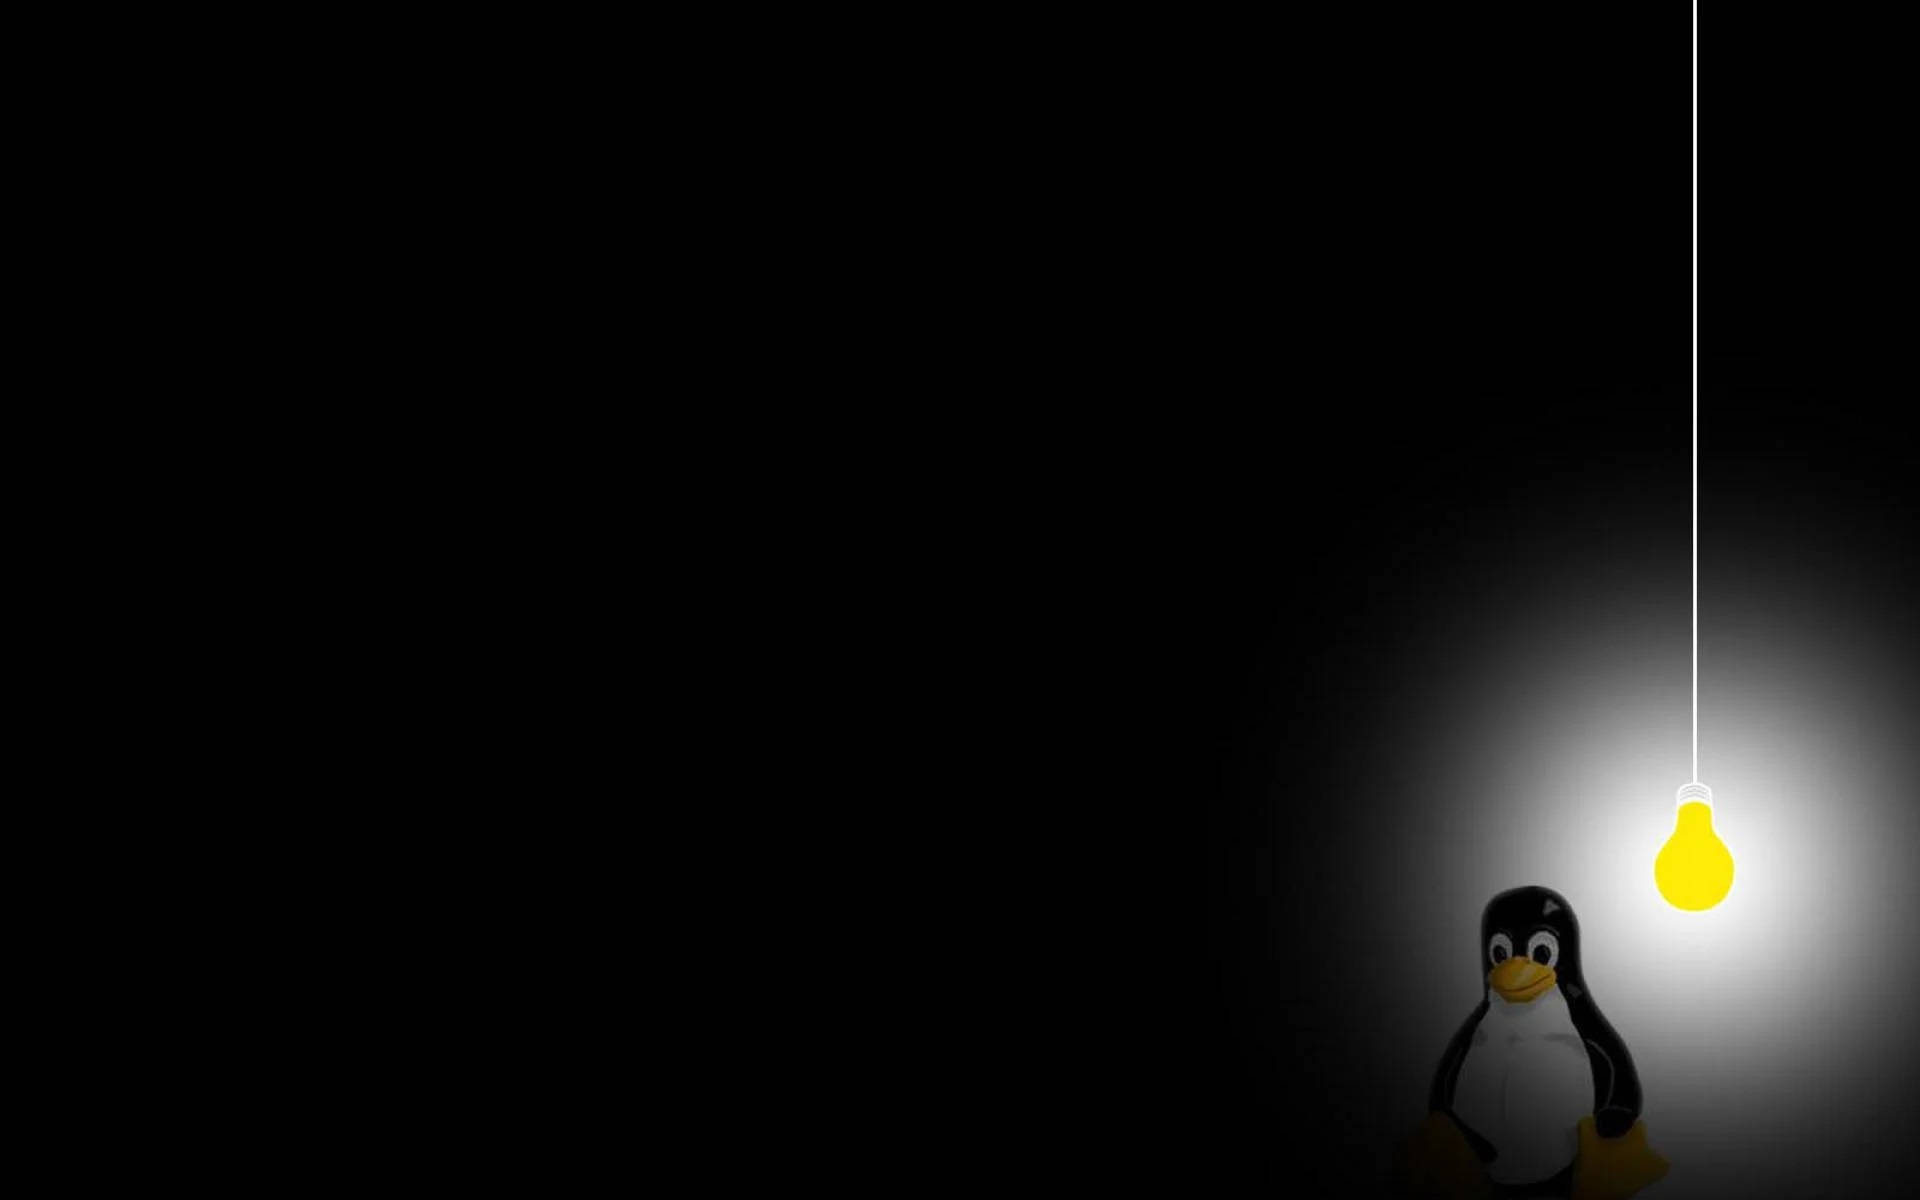 Linux Desktop Official Mascot Tux In The Dark Background